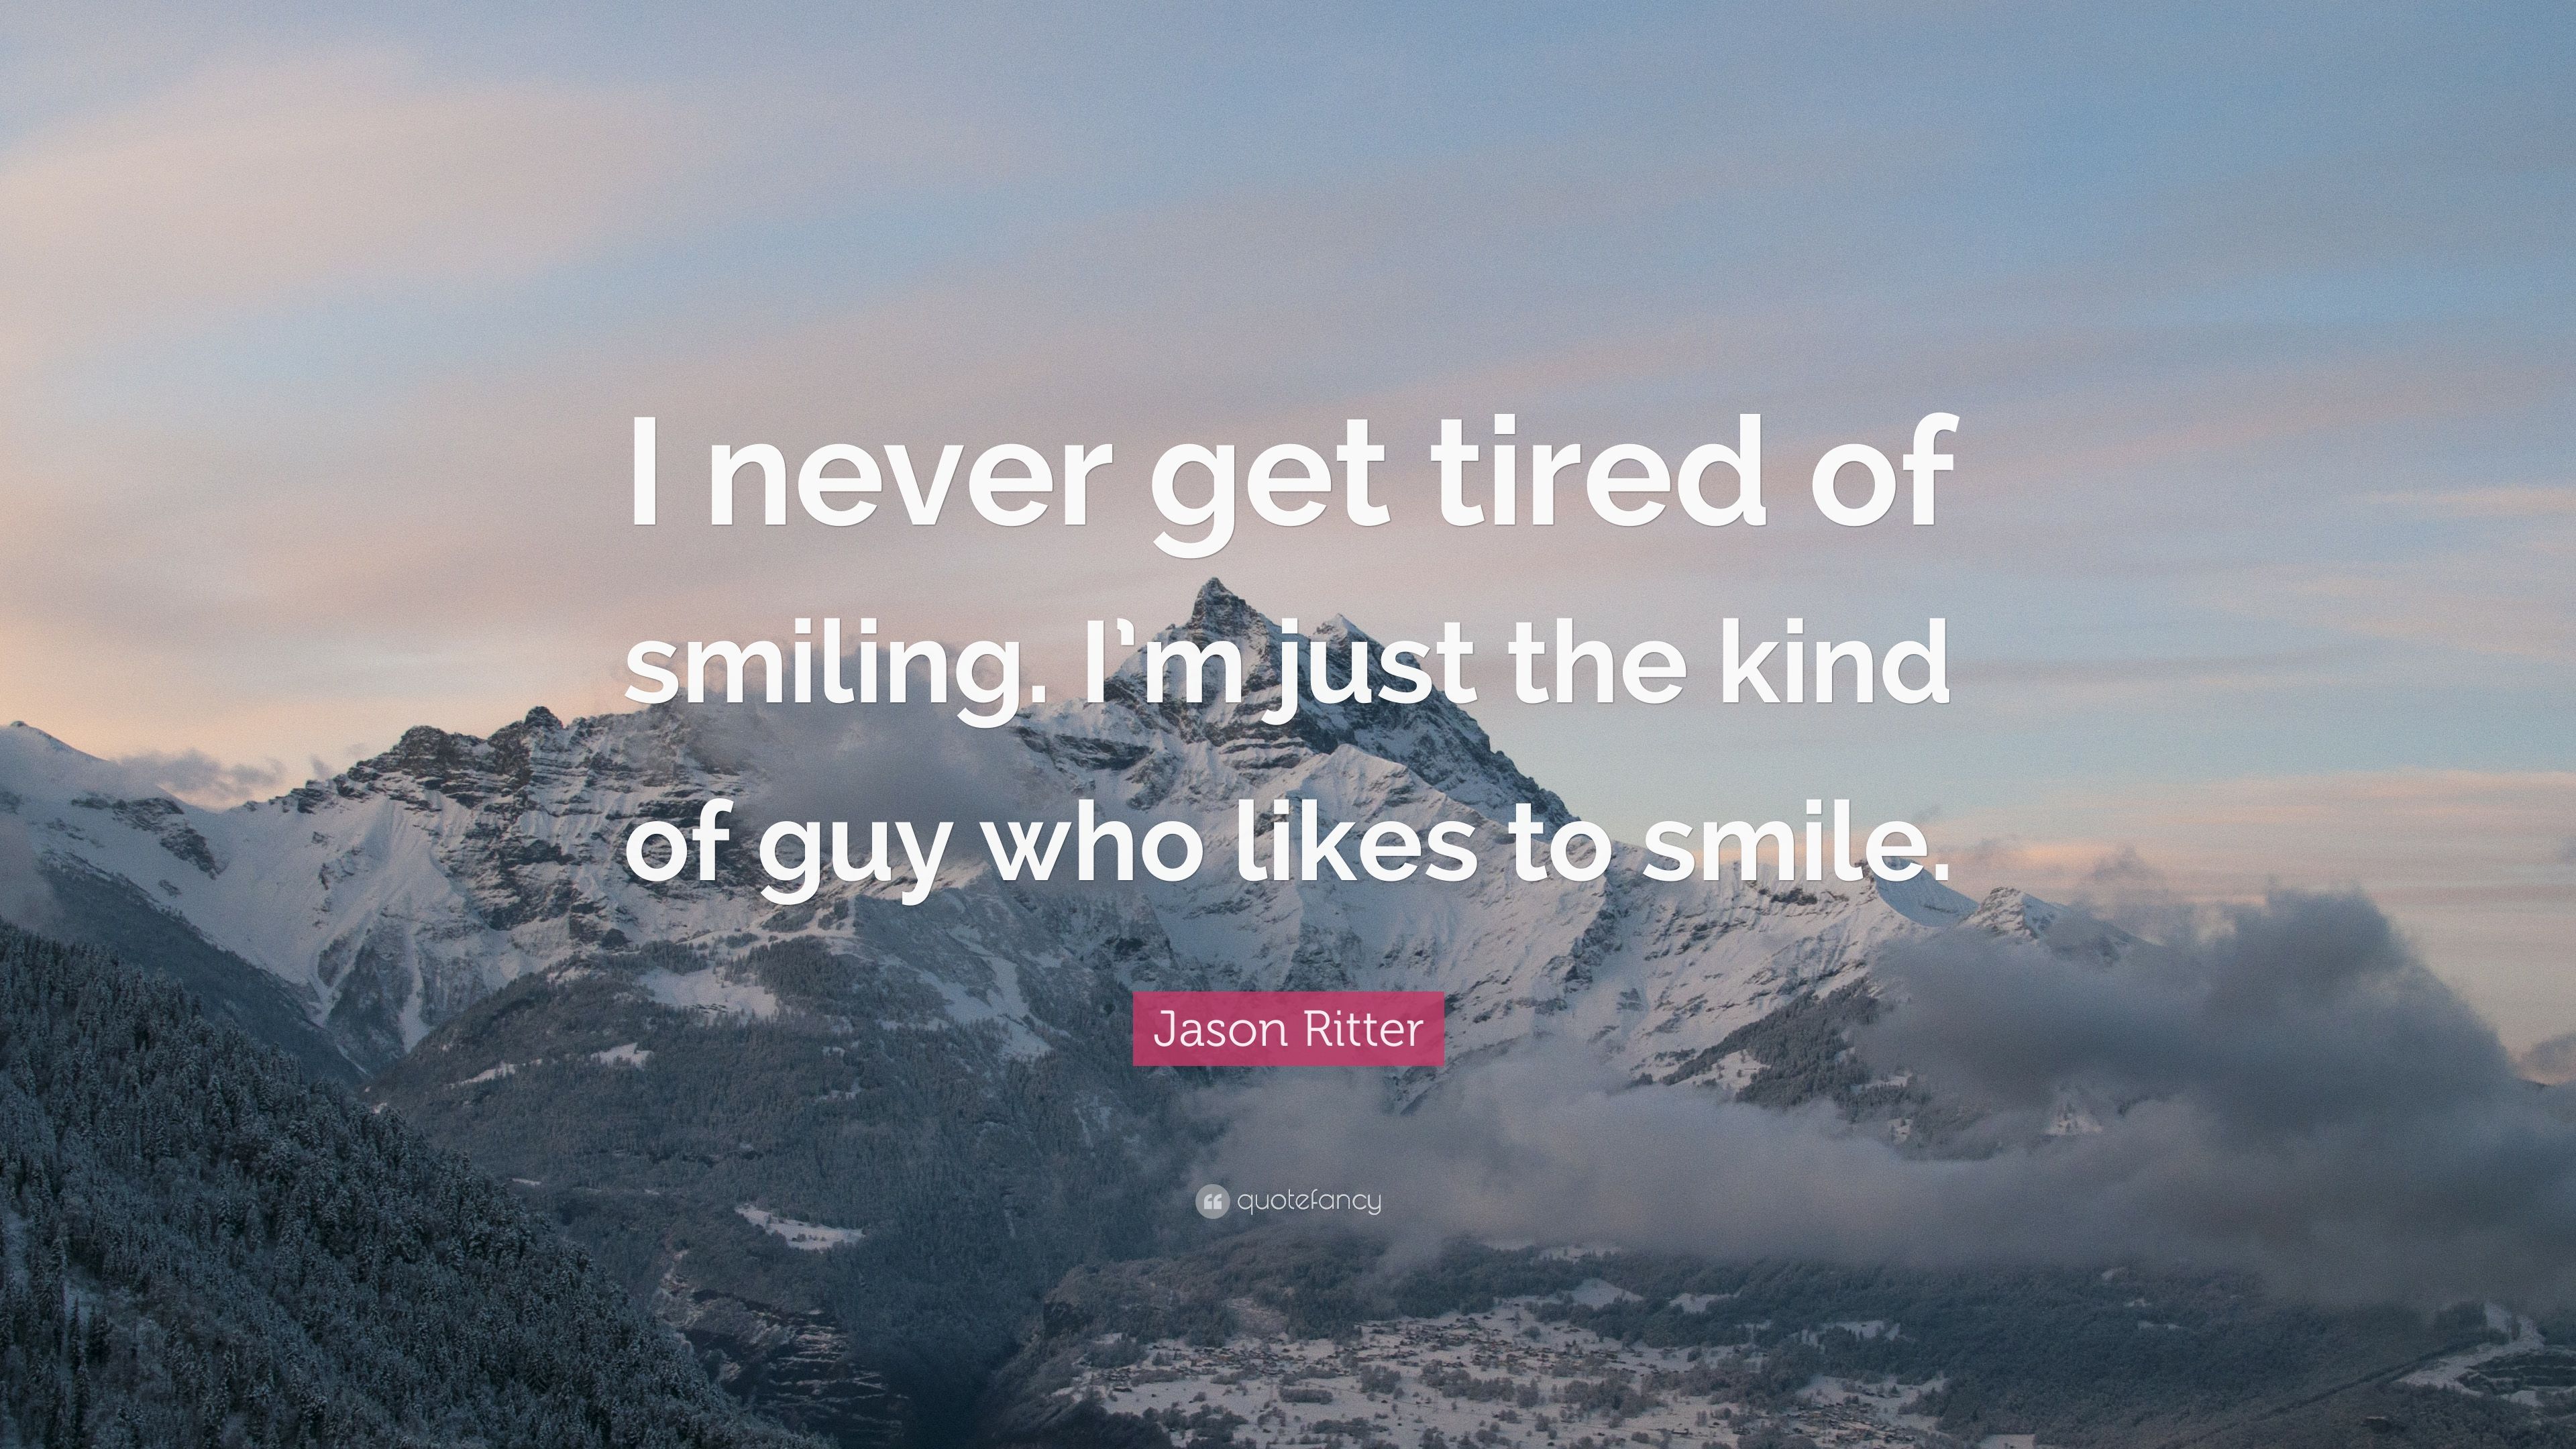 Jason Ritter Quote: “I never get tired of smiling. I'm just